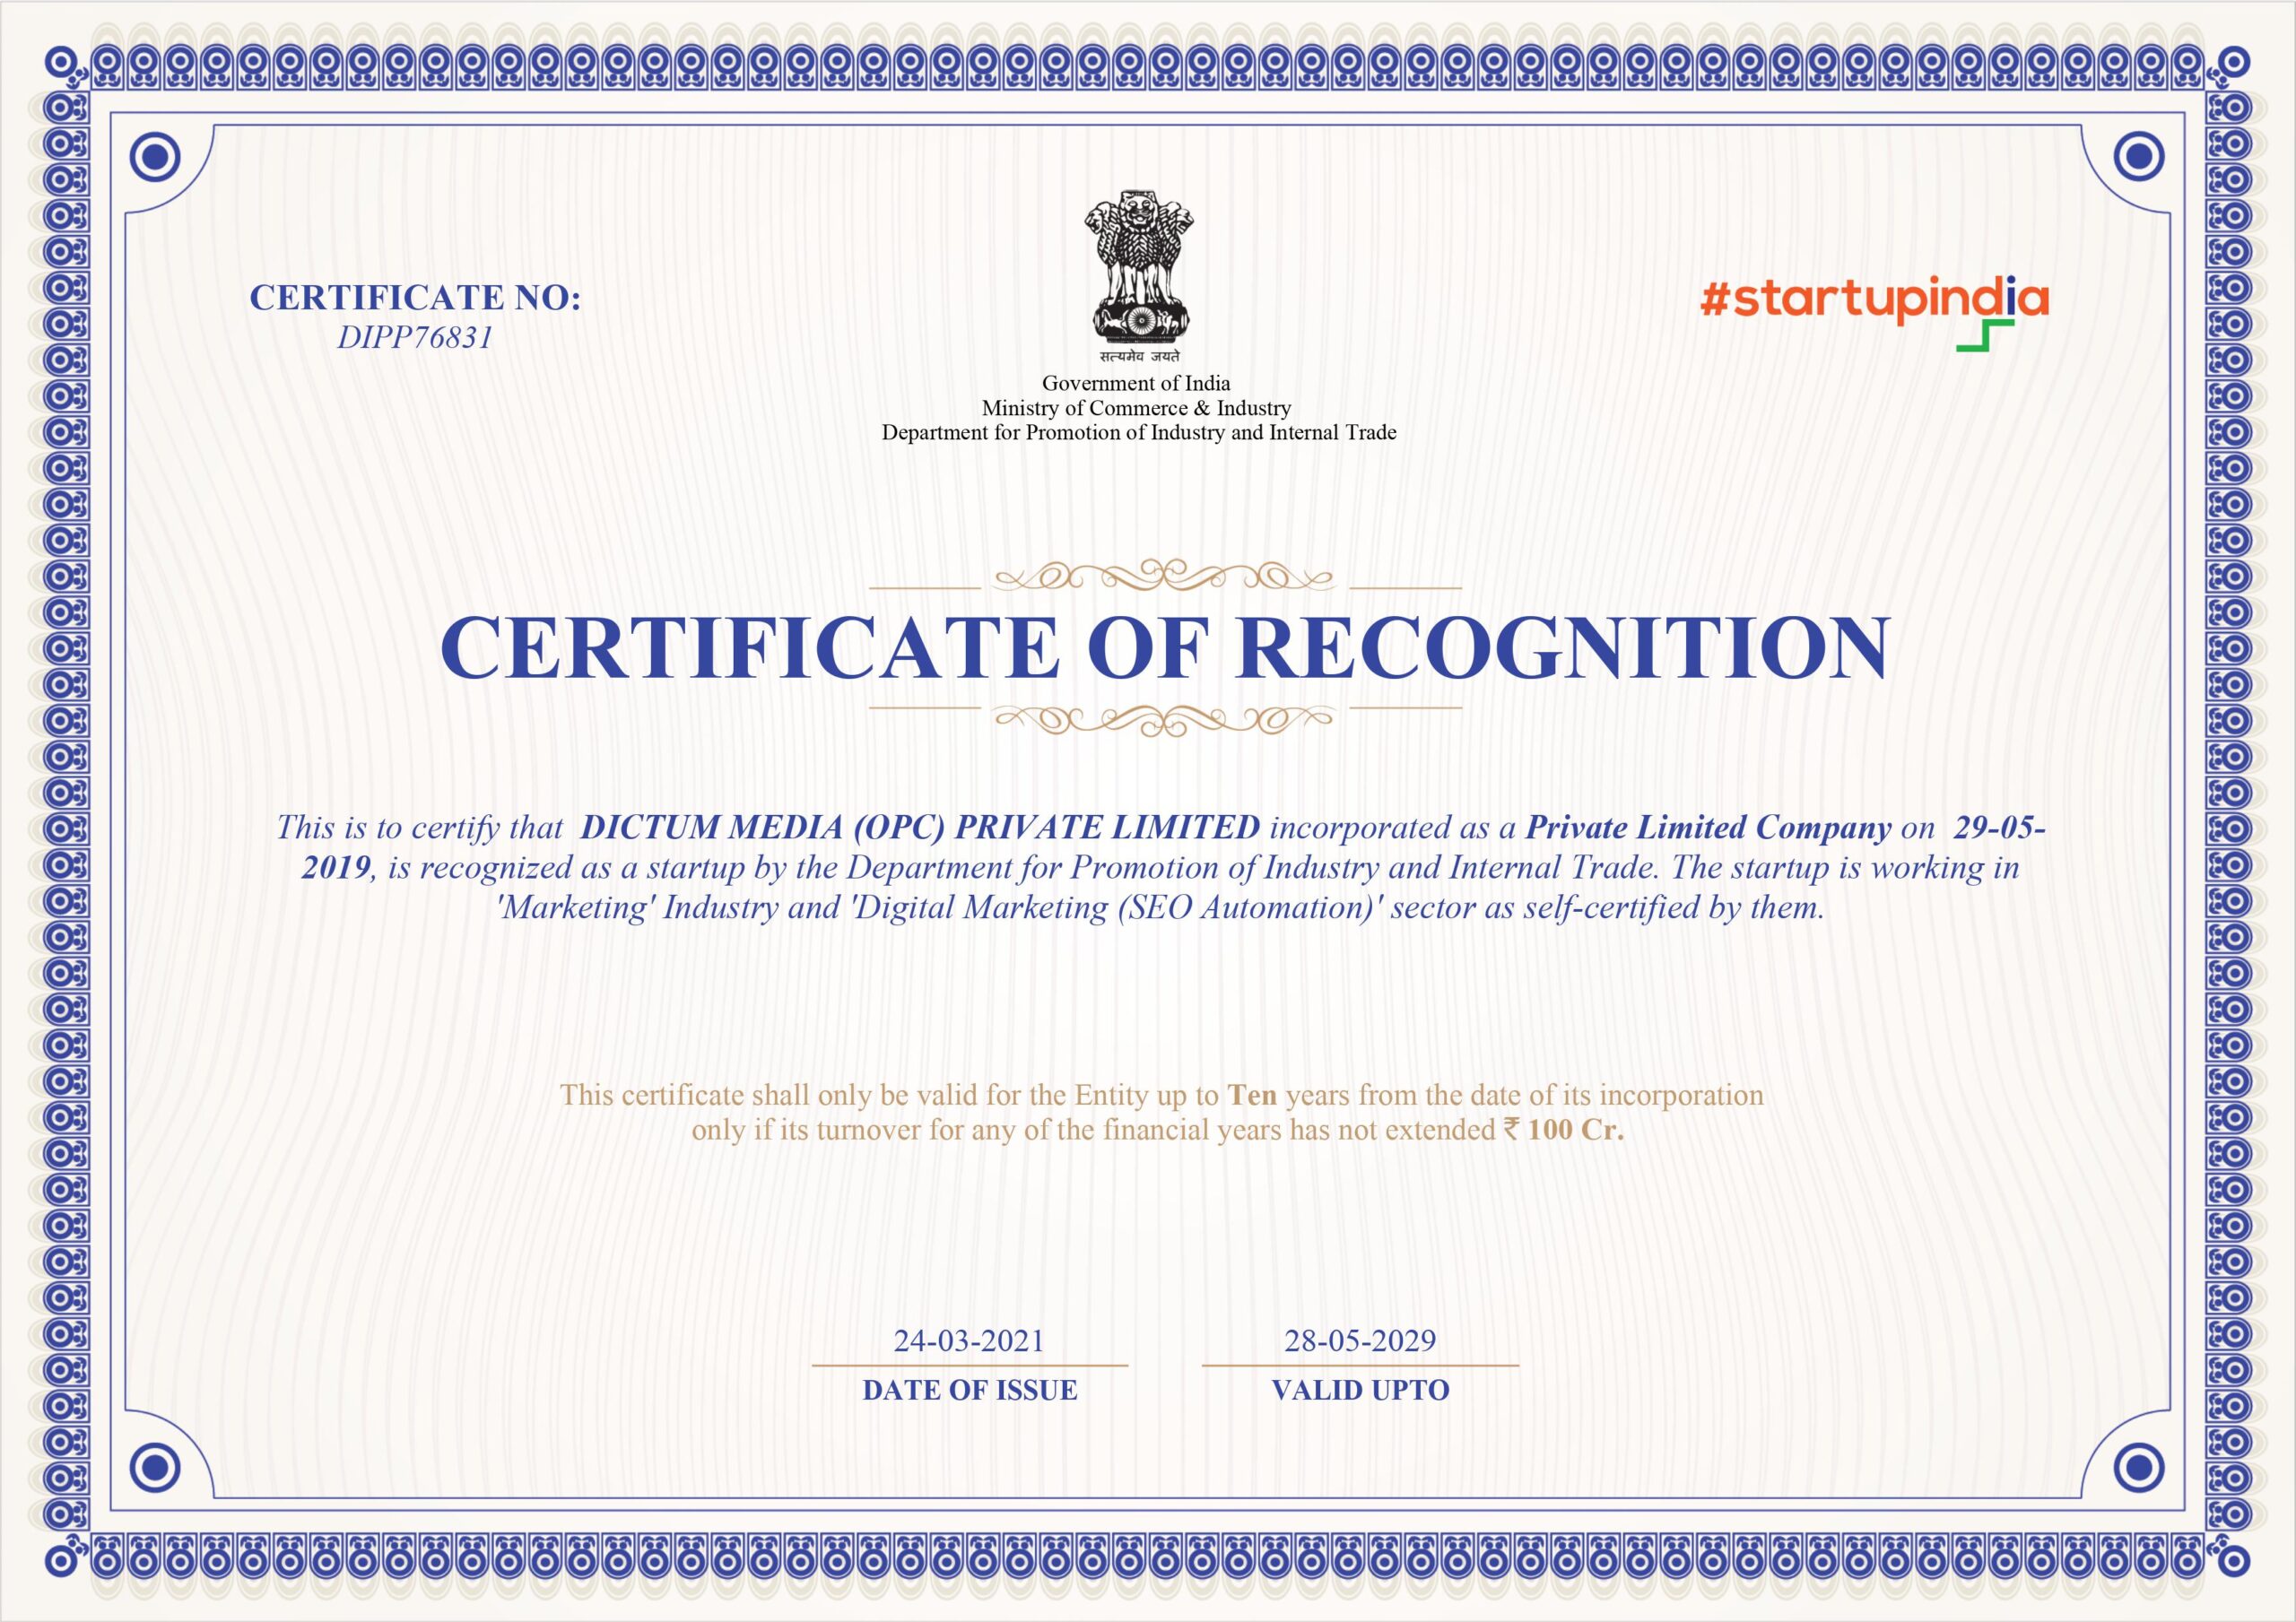 Certificate of Recognition, from DPIIT, Ministry of Commerce, Government of India, Startup India, [Dictum Media]